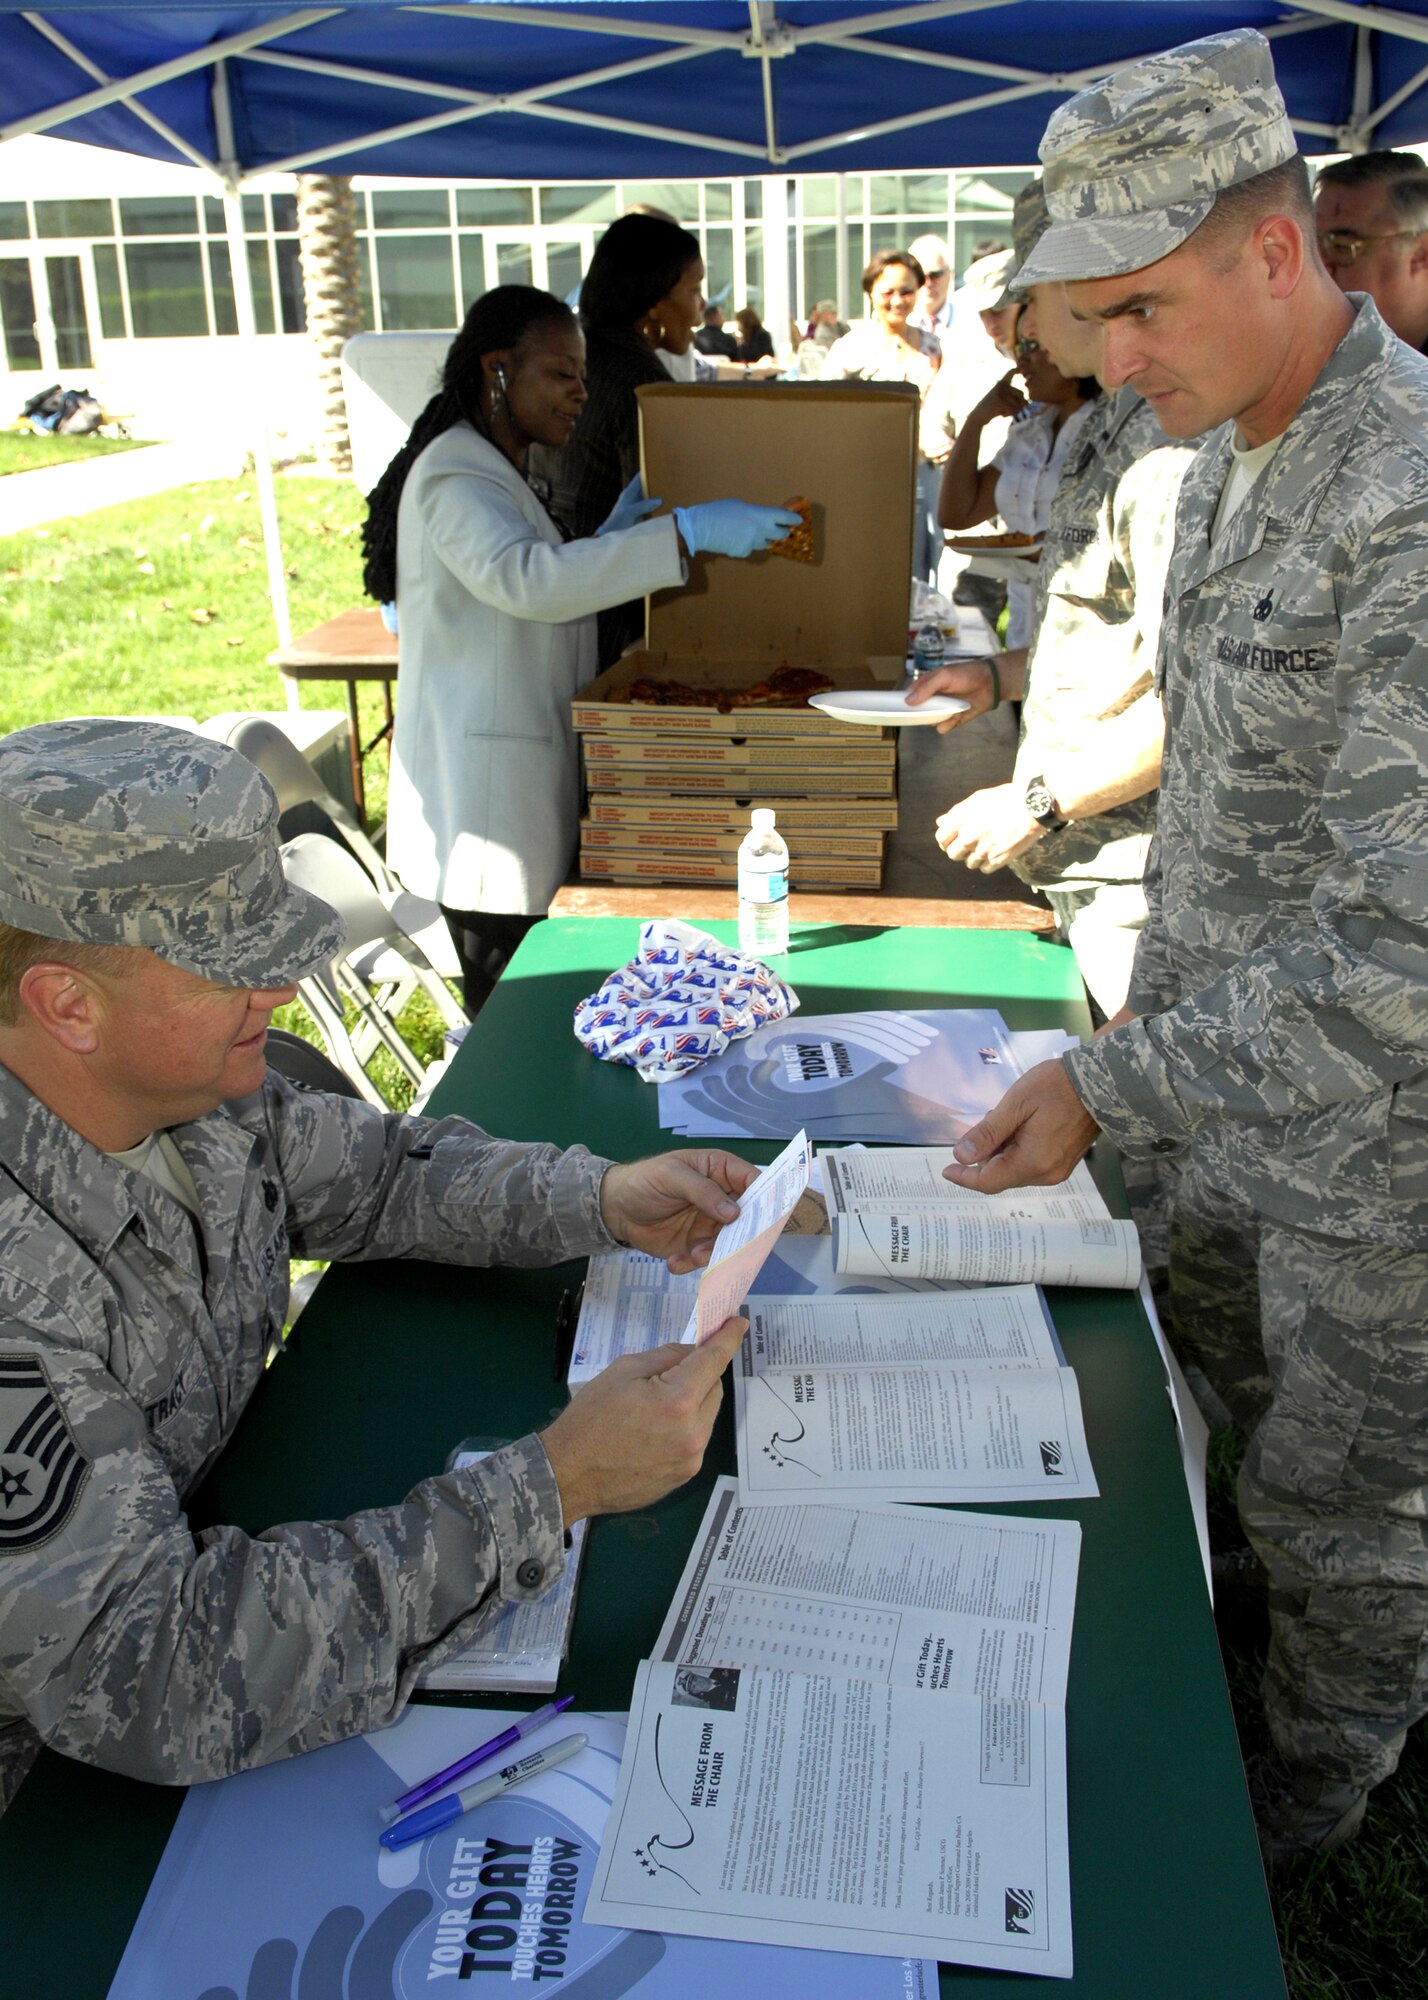 Senior Master Sgt. Douglas Tracy volunteers his time as he reviews the contribution form from Master Sgt. Thomas Raupach, 61st Medical Group, during the Combined Federal Campaign kickoff in the Schriever Space Complex courtyard, Oct. 15.  In the background, base personnel were treated to free pizza and water.  Charitable organizations such as the American Heart Association, American Cancer Association, USO, Big Brothers/Big Sisters, Salvation Army, AIDS ReSearch Alliance, Meals on Wheels West, City of Hope, Mission to Children, the United Way, and others passed out information to attendees.  (Photo by Stephen Schester)